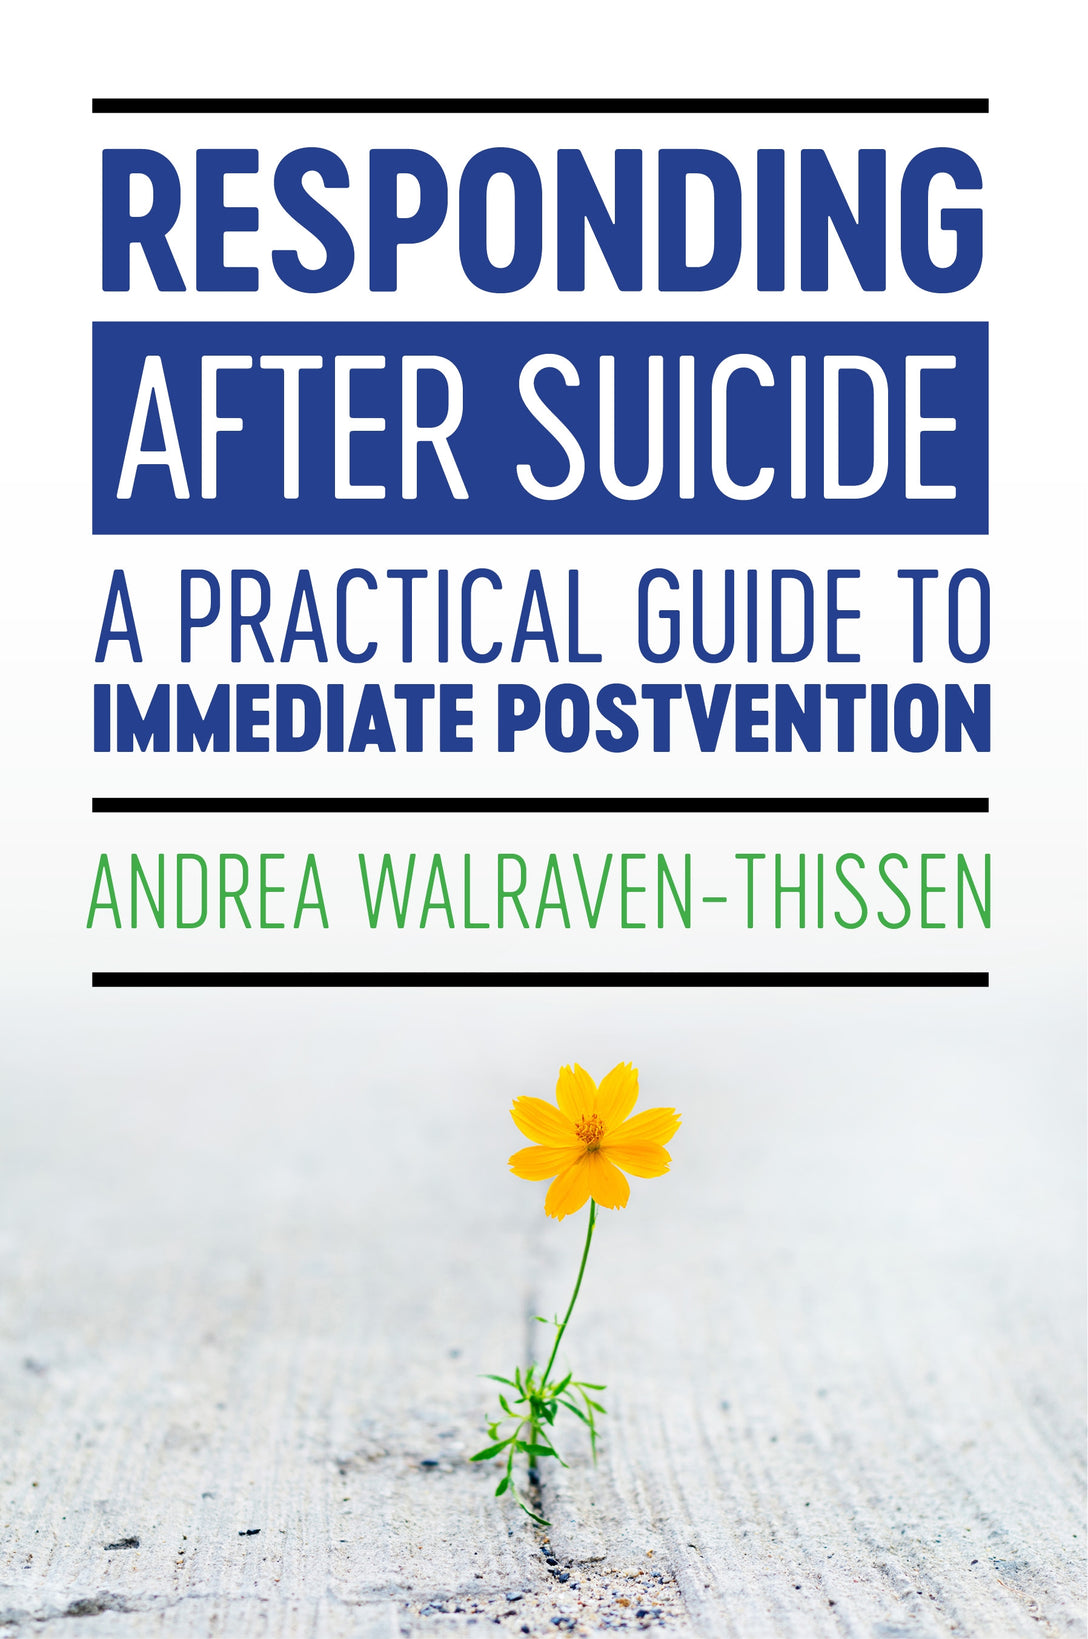 Responding After Suicide by Andrea Walraven-Thissen